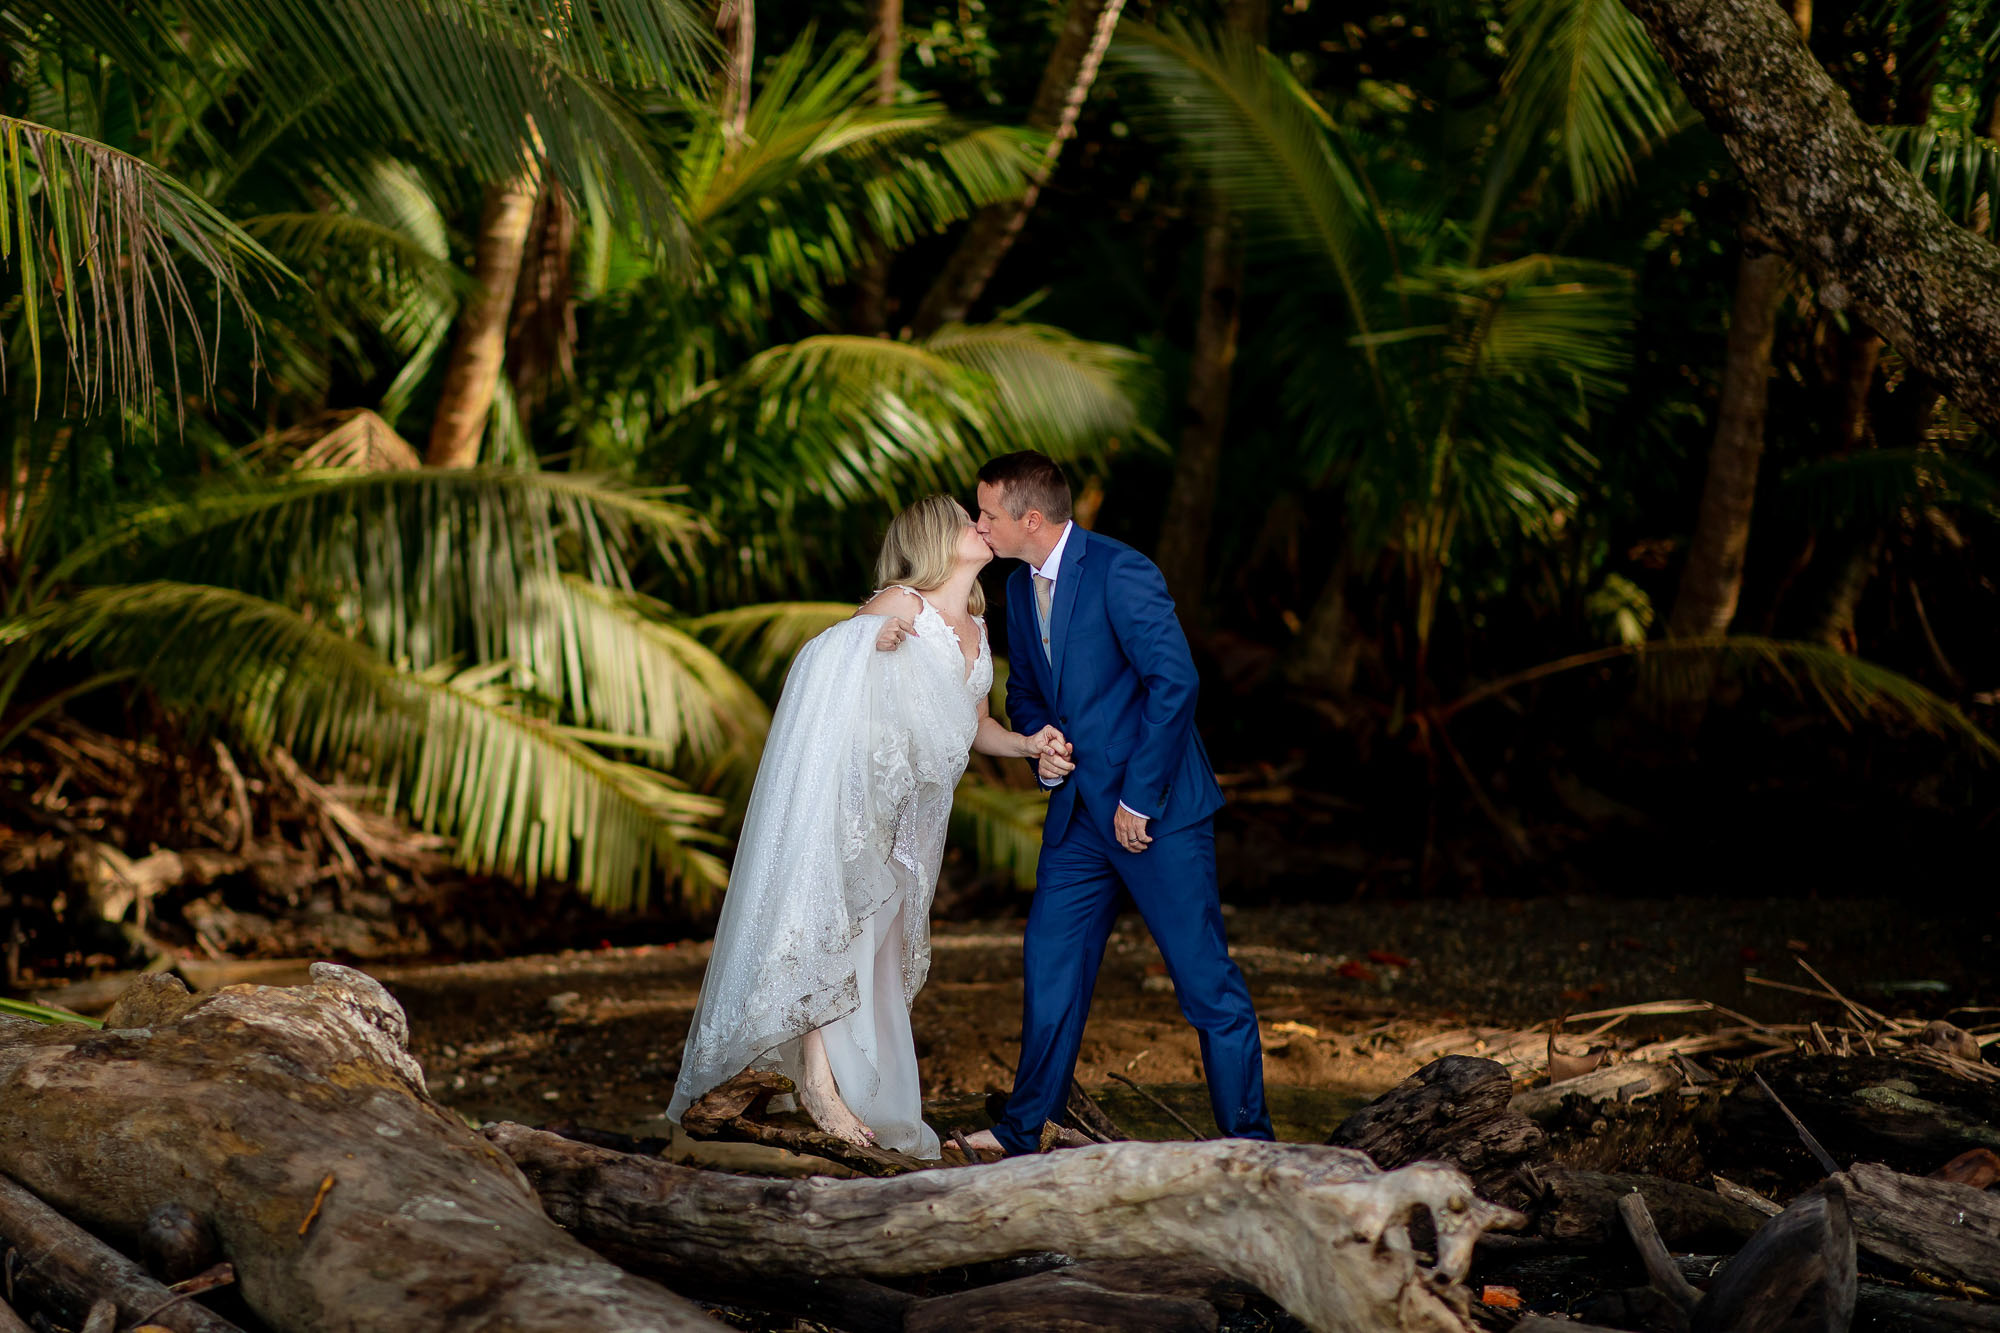 The bride and groom on the beach as part of their Costa Rica wedding experience!